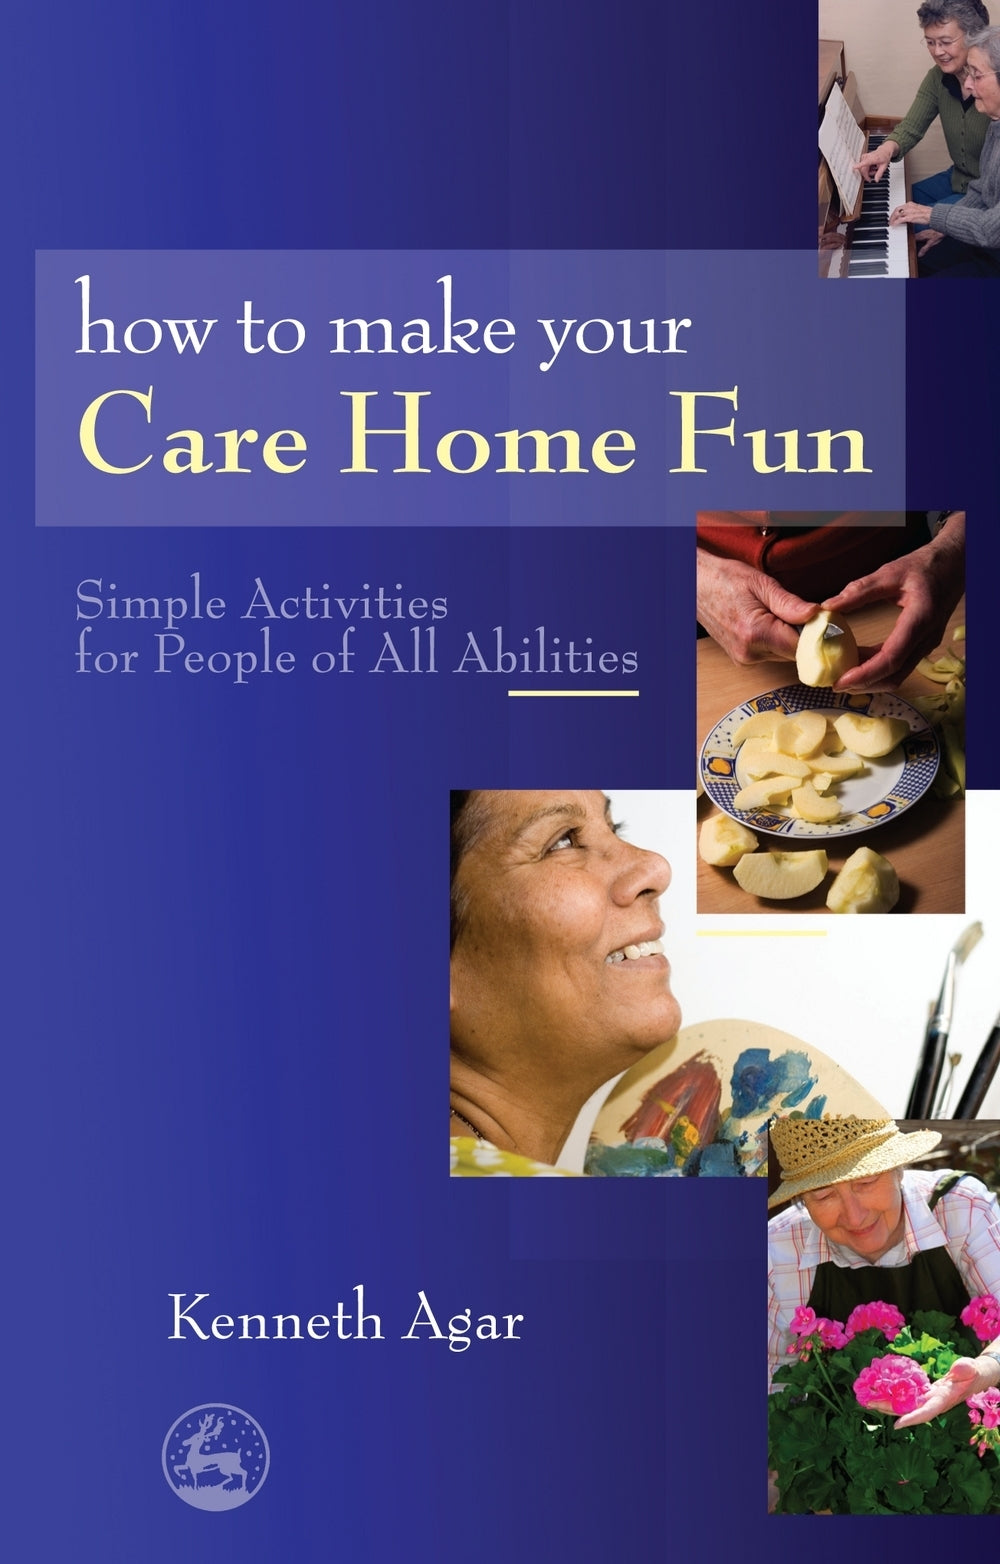 How to Make Your Care Home Fun by Sue Rolfe